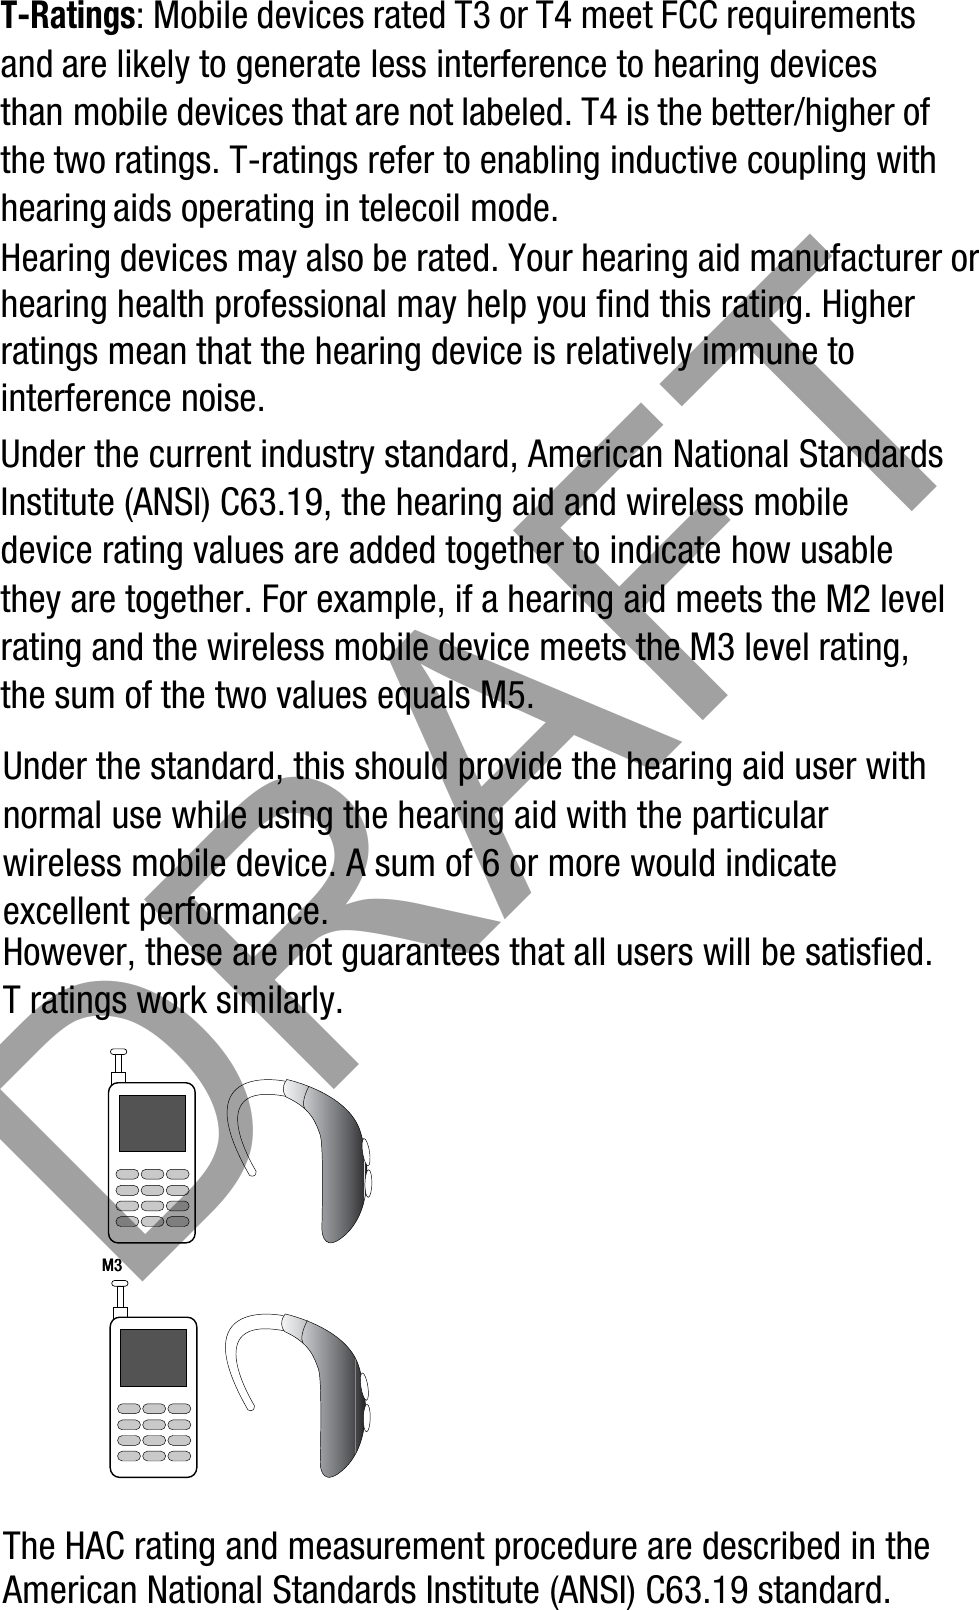 T-Ratings: Mobile devices rated T3 or T4 meet FCC requirements and are likely to generate less interference to hearing devices than mobile devices that are not labeled. T4 is the better/higher of the two ratings. T-ratings refer to enabling inductive coupling with hearing aids operating in telecoil mode.Hearing devices may also be rated. Your hearing aid manufacturer or hearing health professional may help you find this rating. Higher ratings mean that the hearing device is relatively immune to interference noise. Under the current industry standard, American National Standards Institute (ANSI) C63.19, the hearing aid and wireless mobile device rating values are added together to indicate how usable they are together. For example, if a hearing aid meets the M2 level rating and the wireless mobile device meets the M3 level rating, the sum of the two values equals M5. Under the standard, this should provide the hearing aid user with normal use while using the hearing aid with the particular wireless mobile device. A sum of 6 or more would indicate excellent performance.  However, these are not guarantees that all users will be satisfied. T ratings work similarly.The HAC rating and measurement procedure are described in the American National Standards Institute (ANSI) C63.19 standard.M3M3       DRAFT